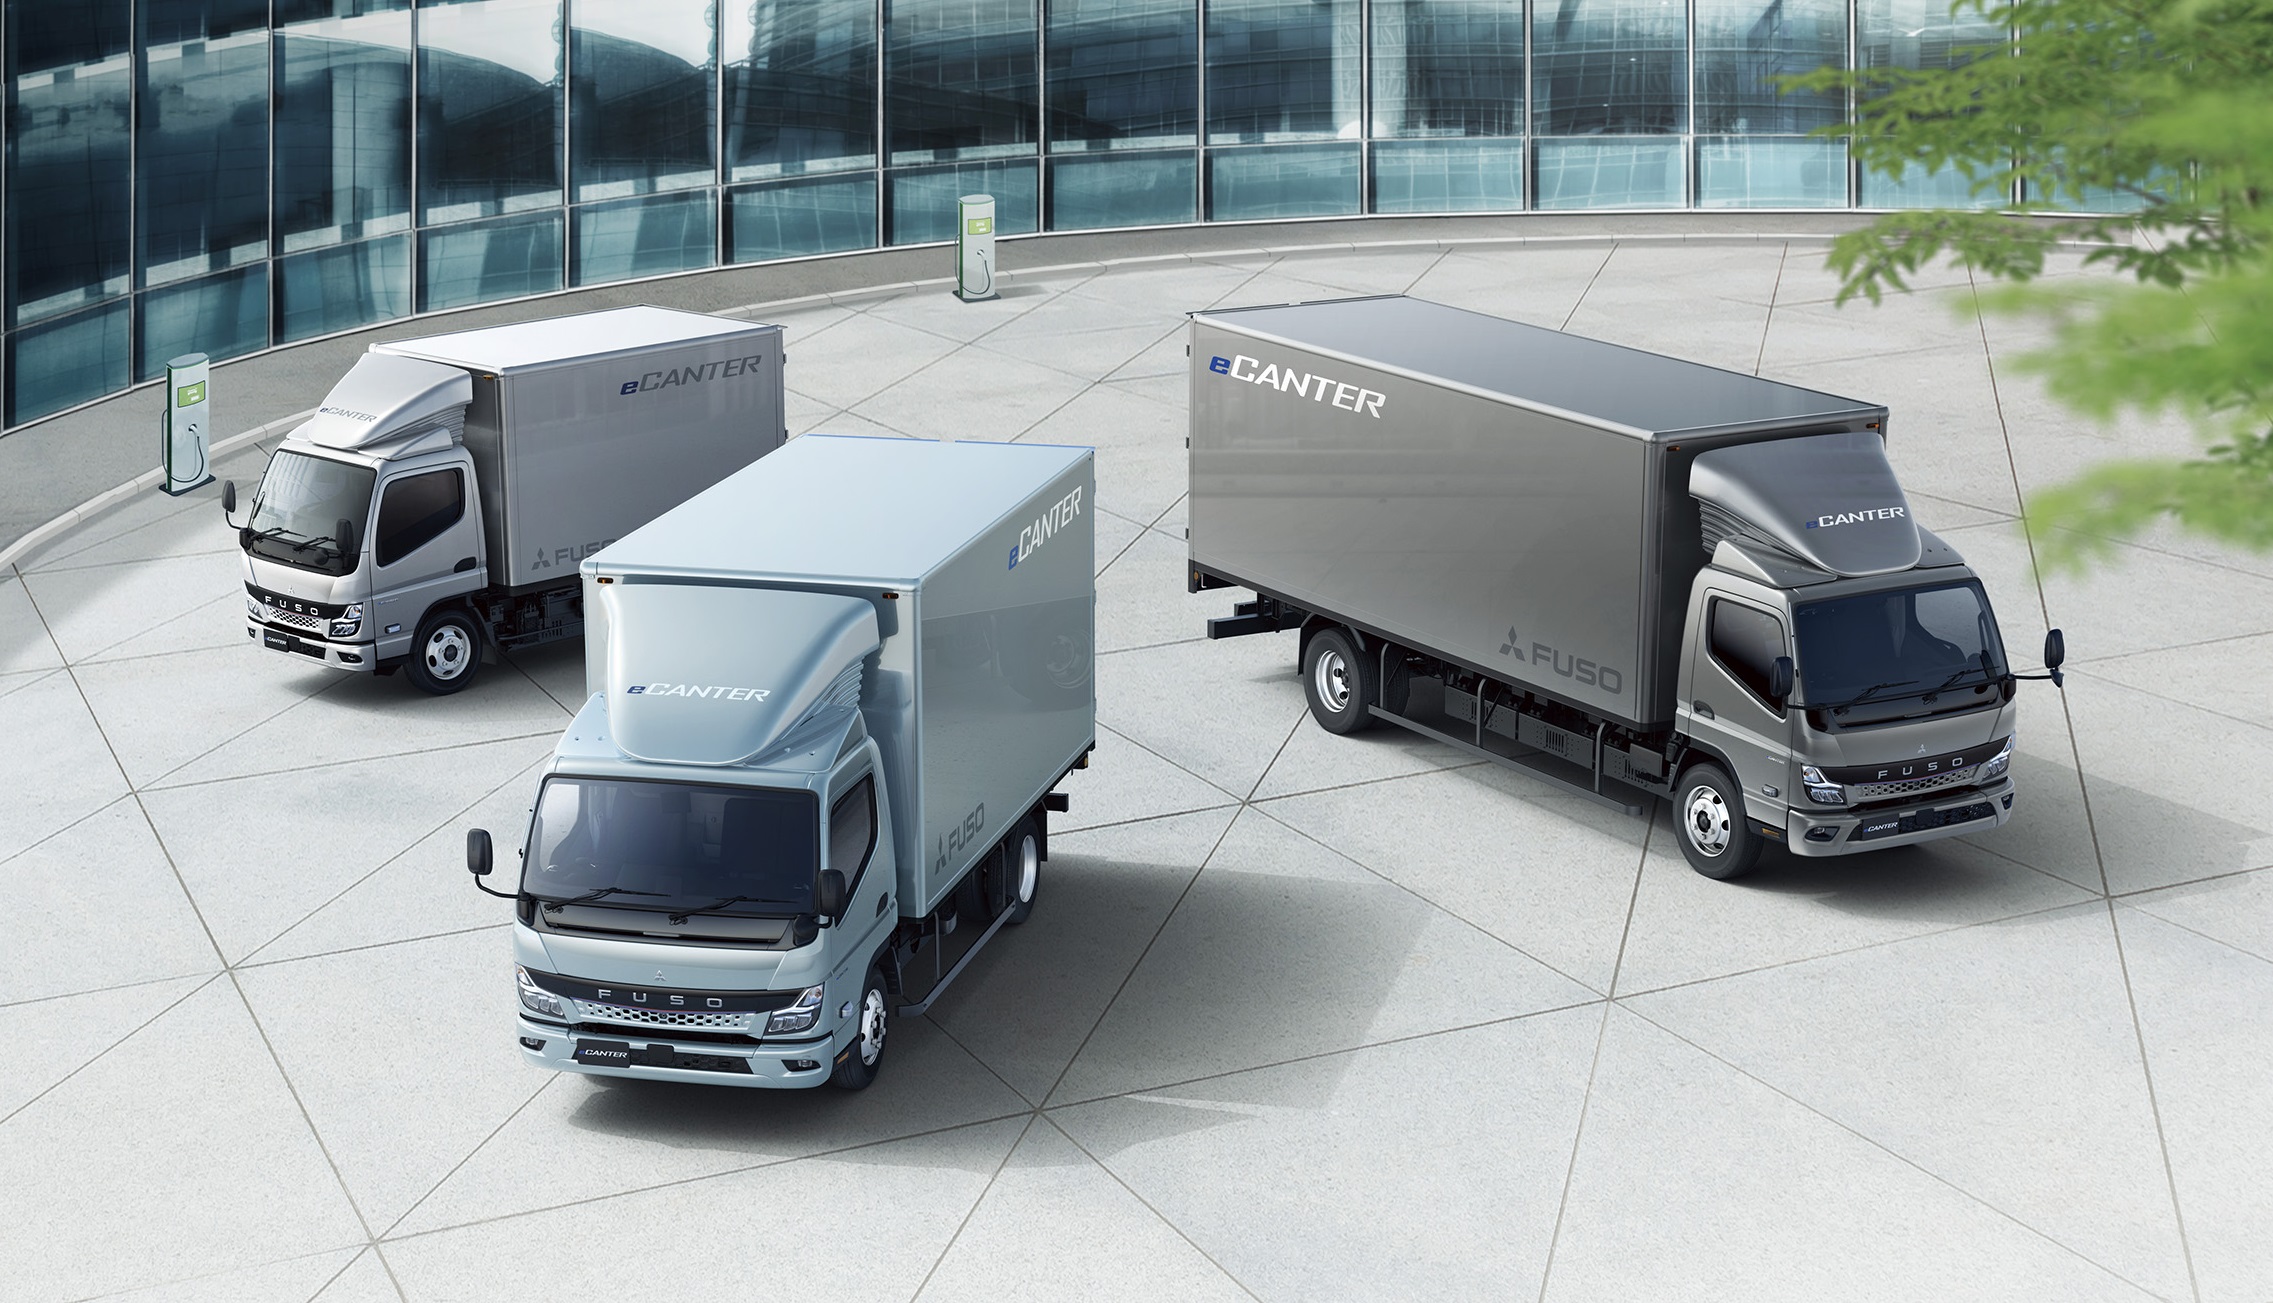 mitsubishi-fuso-opens-orders-for-the-new-all-electric-light-duty-ecanter-truck-in-japan